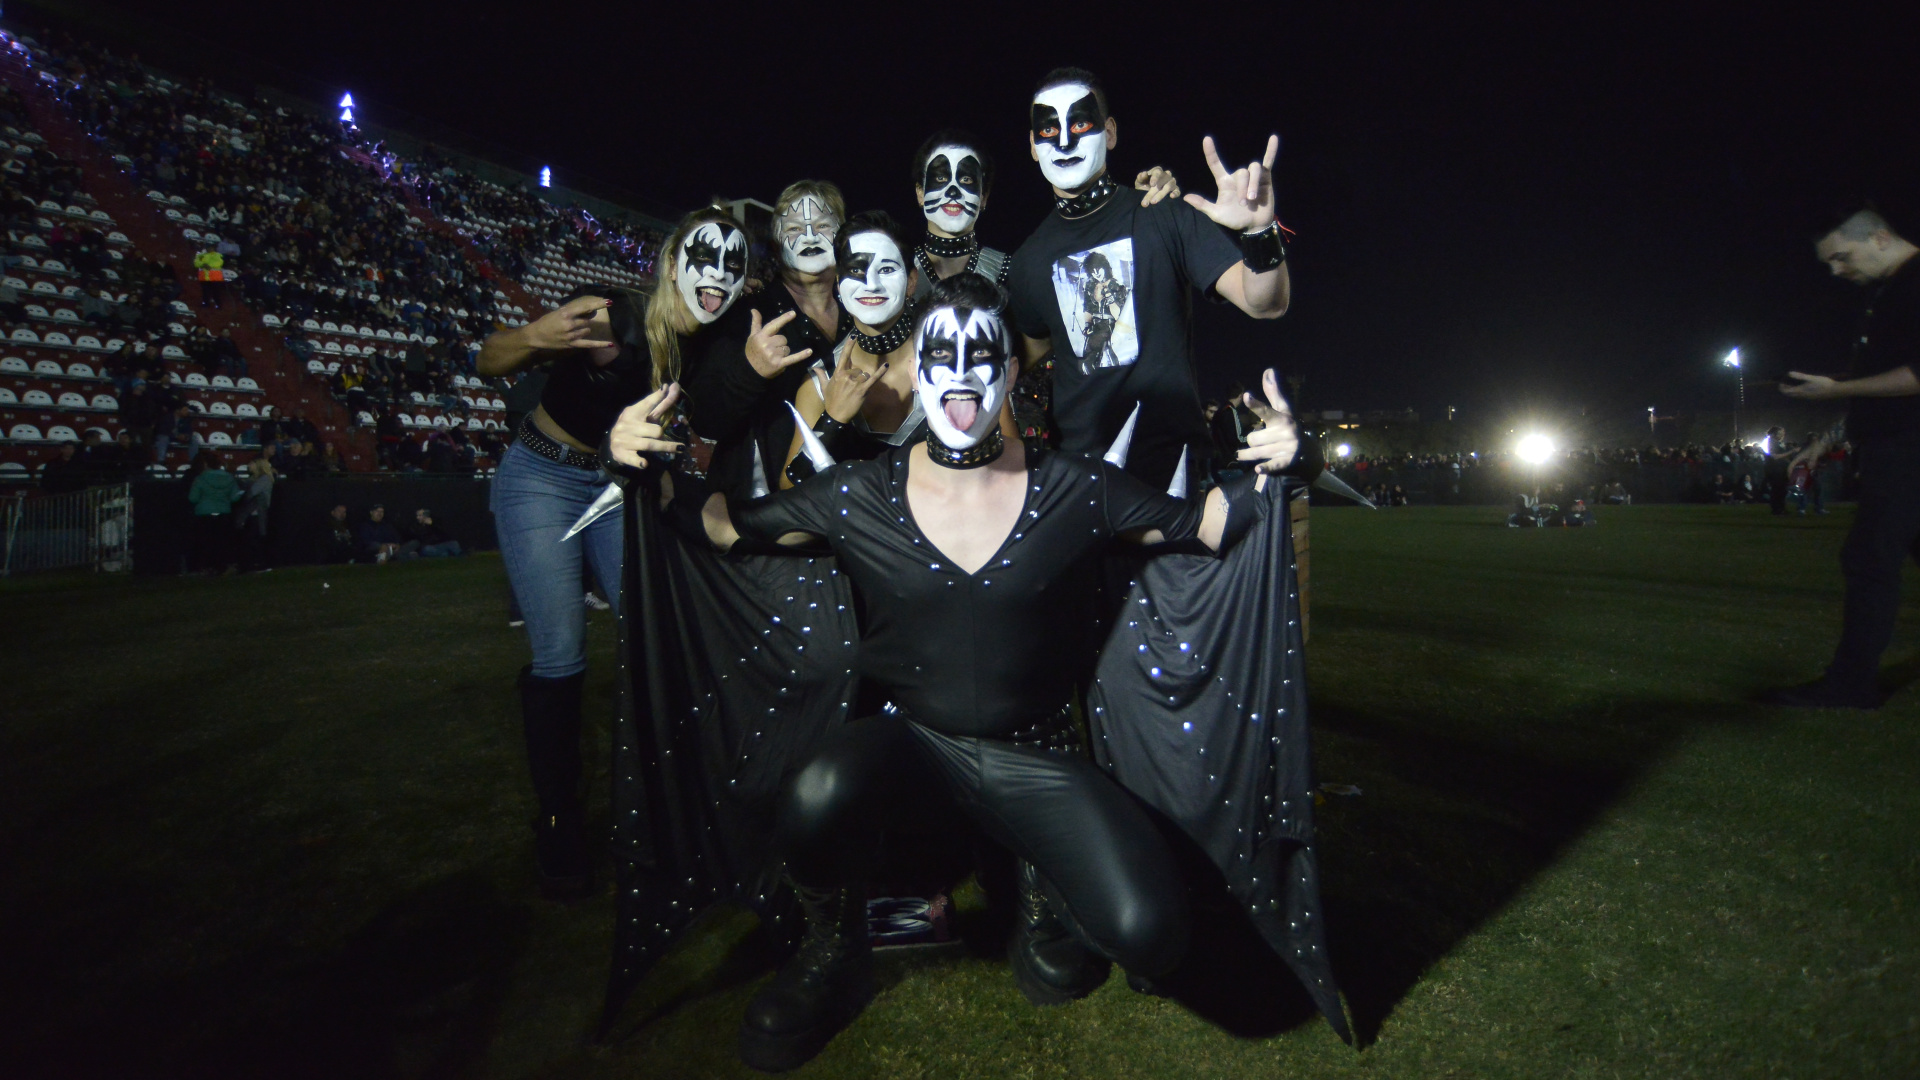 The Kiss Army of Argentina fully enjoyed the show at the Campo Argentino de Polo